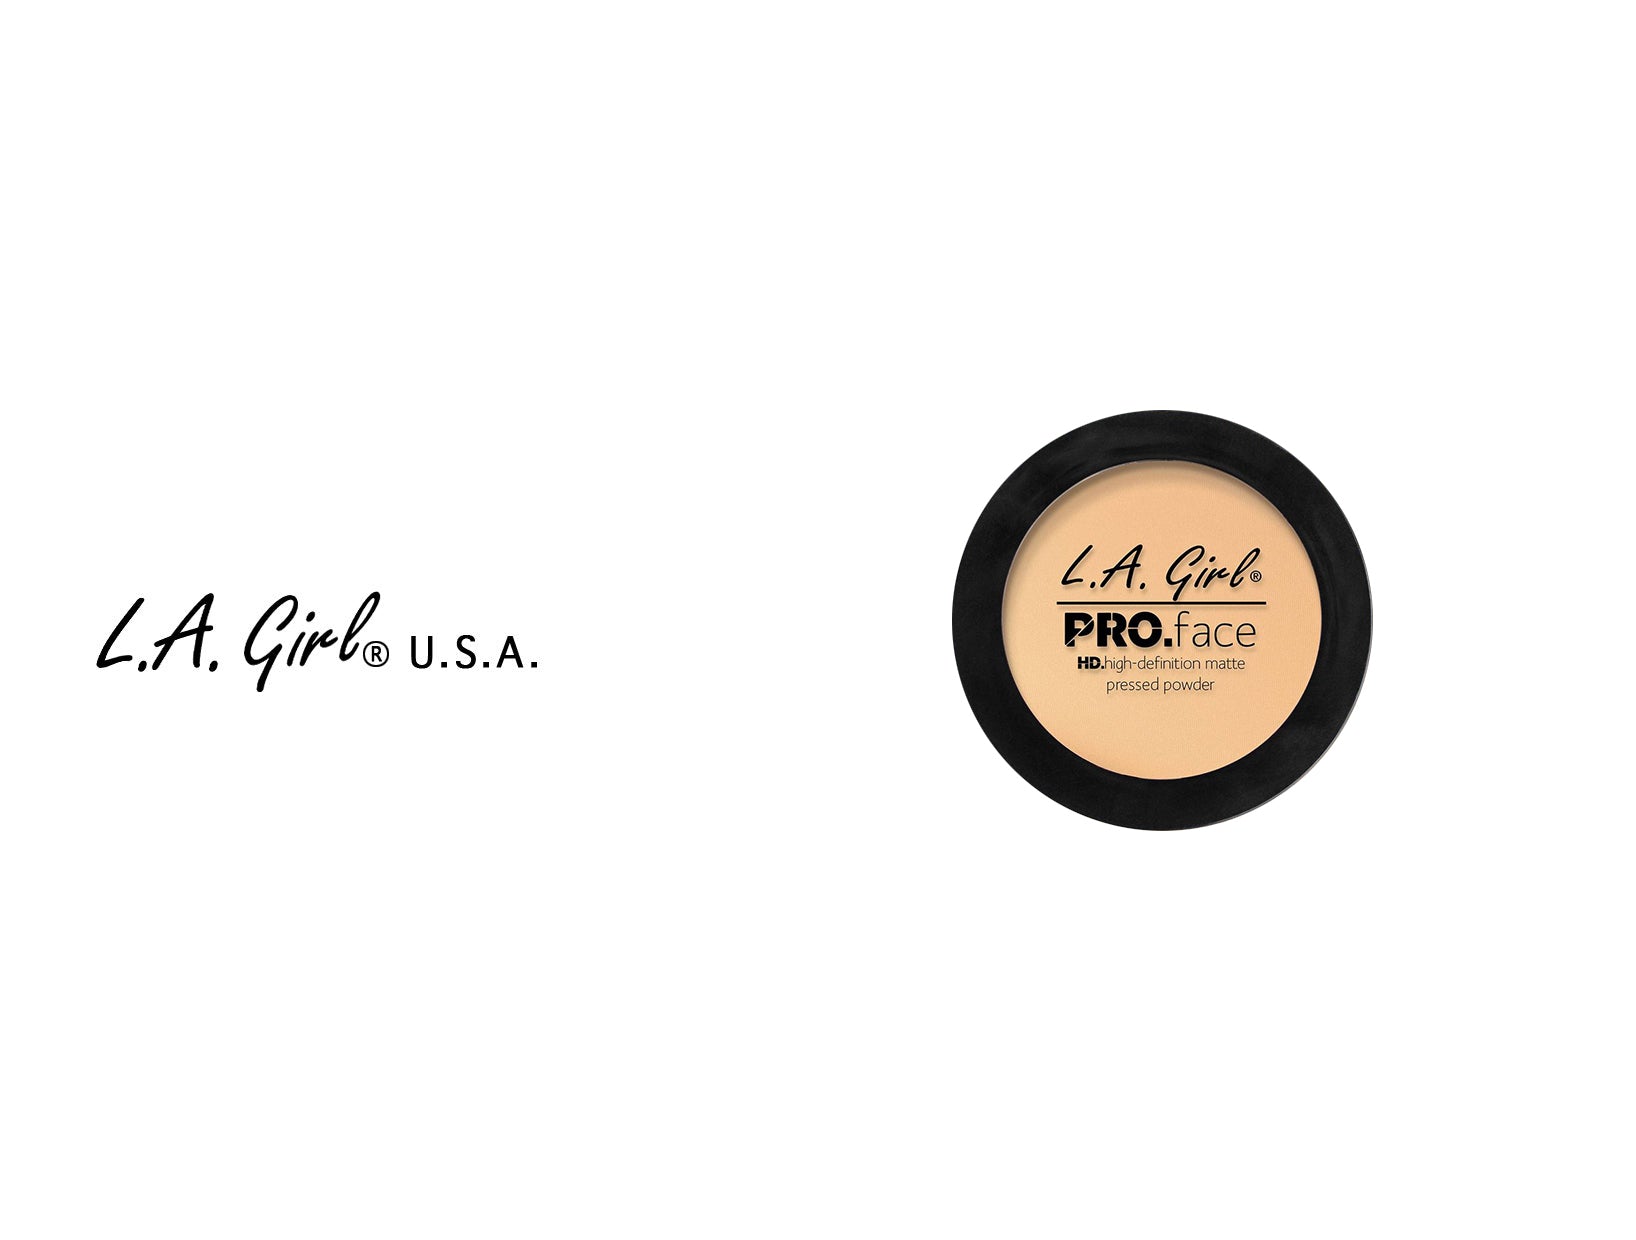 L. A. Girl PRO.prep HD. high-definition smoothing face primer 12 hour  Review Wear TEST (oily skin) 